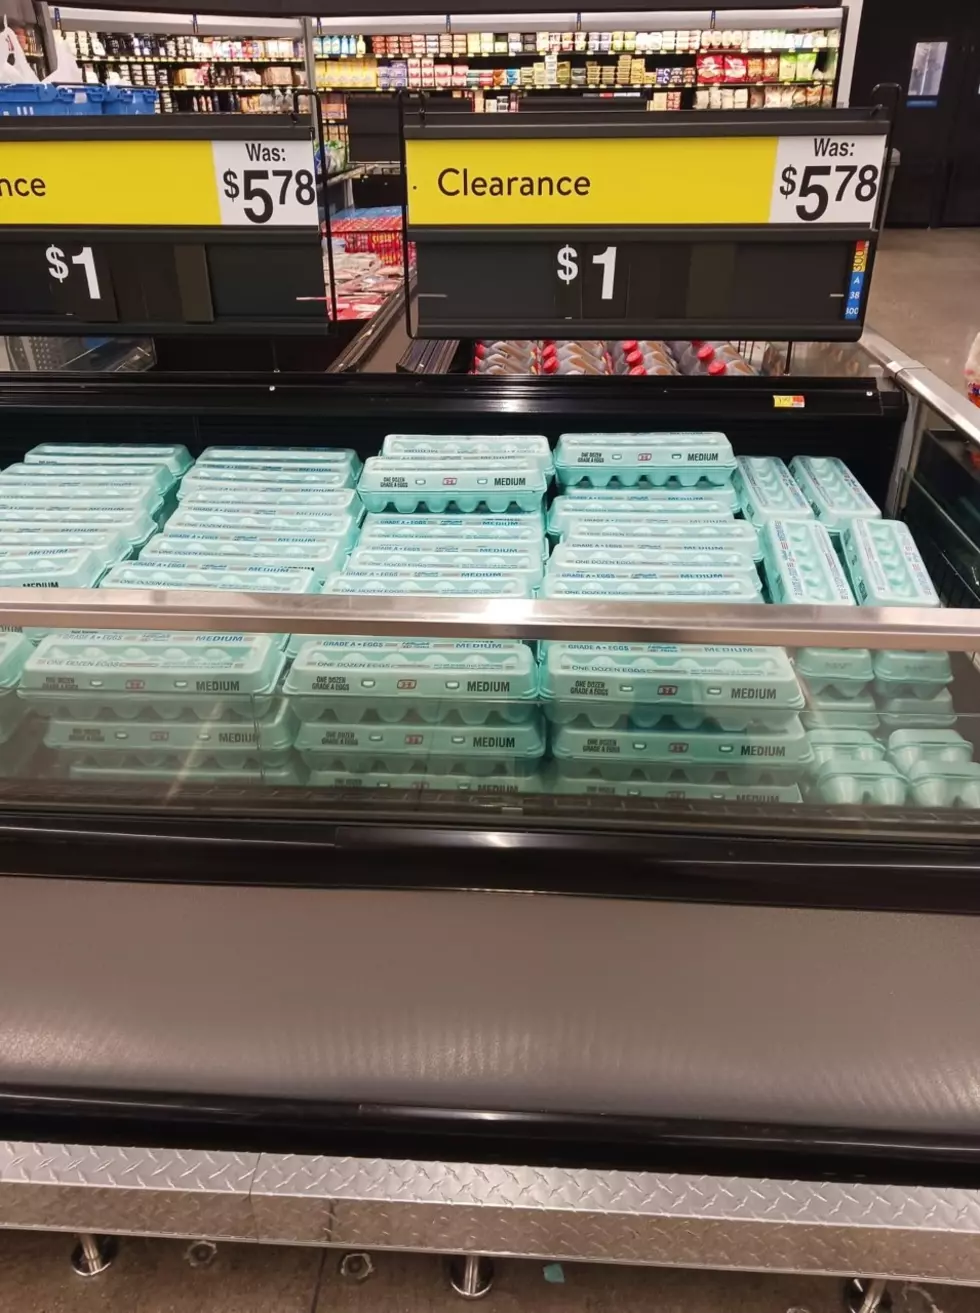 Casper Walmart Sold Cartons of Eggs for One Dollar&#8230;But Now They&#8217;re Mostly Gone